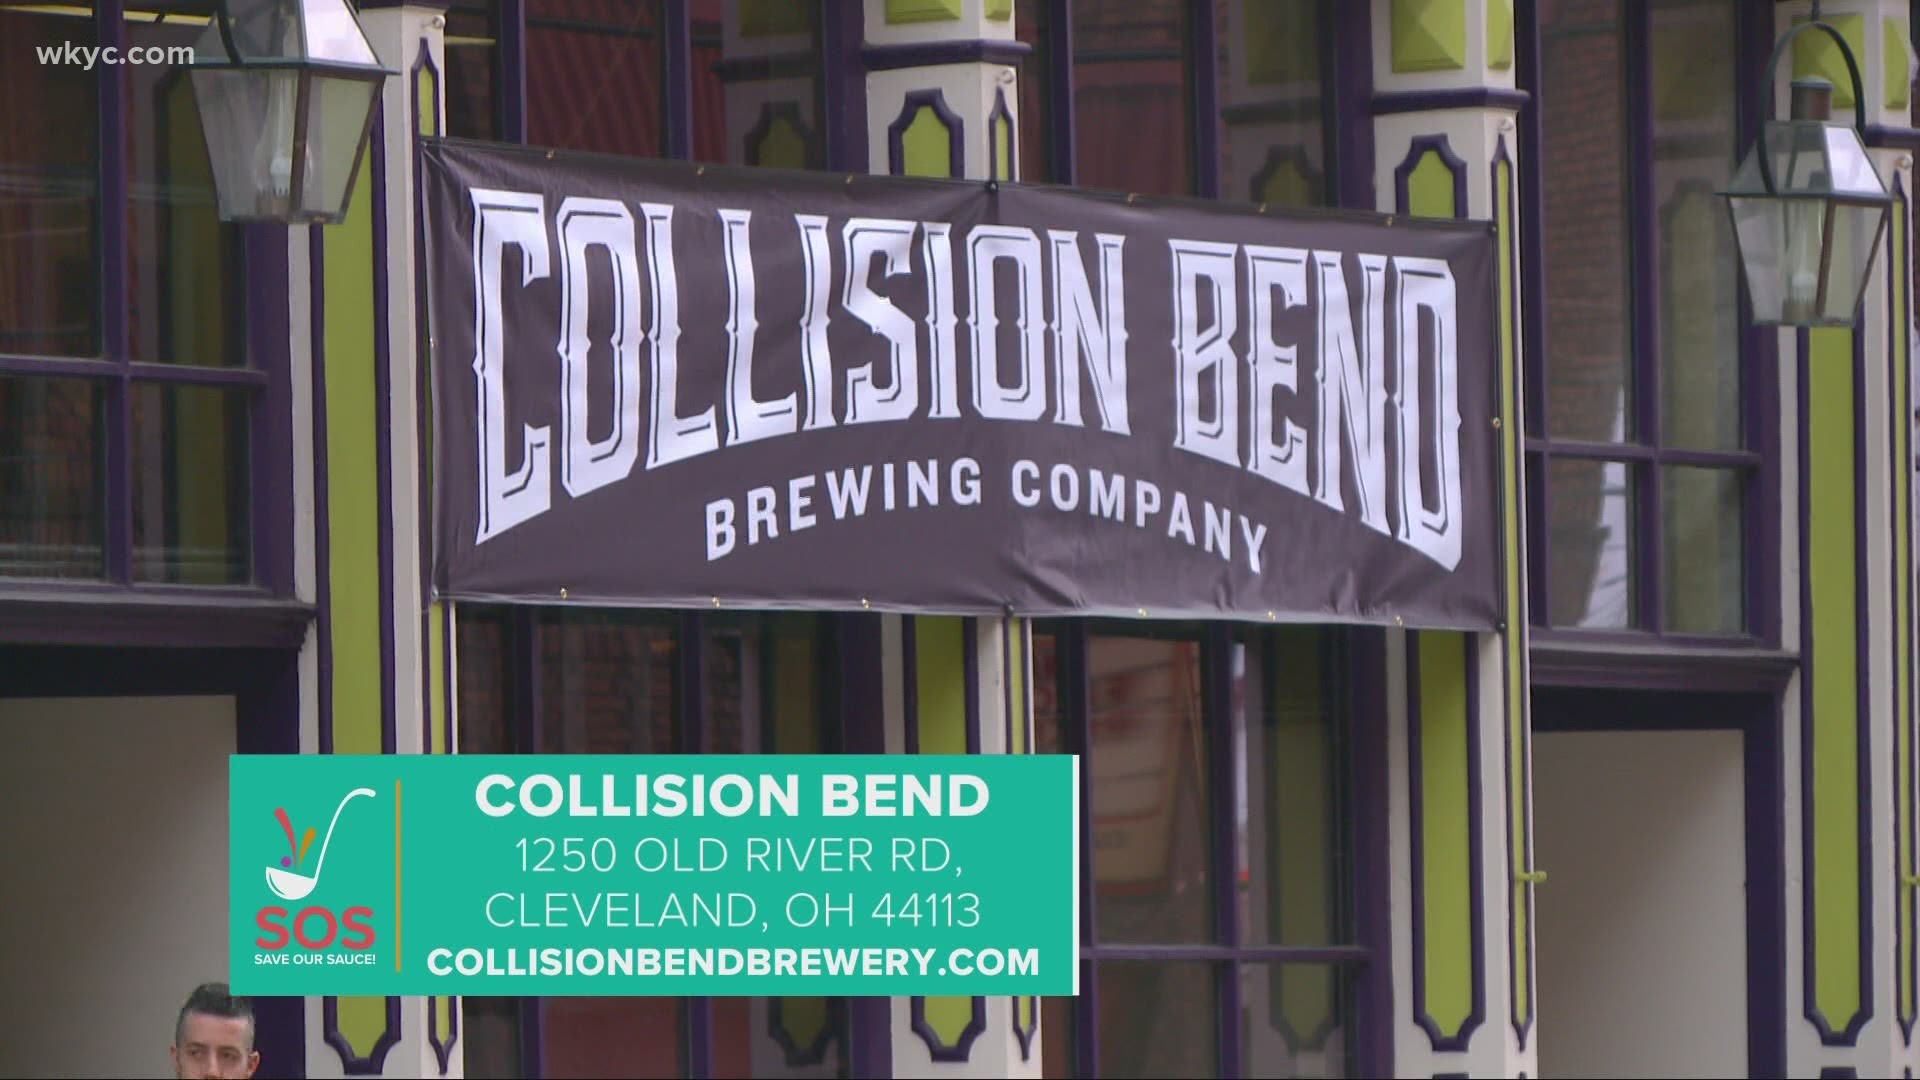 We're highlighting the Collision Bend Brewing Company in Cleveland as part of the 'Save Our Sauce' campaign.